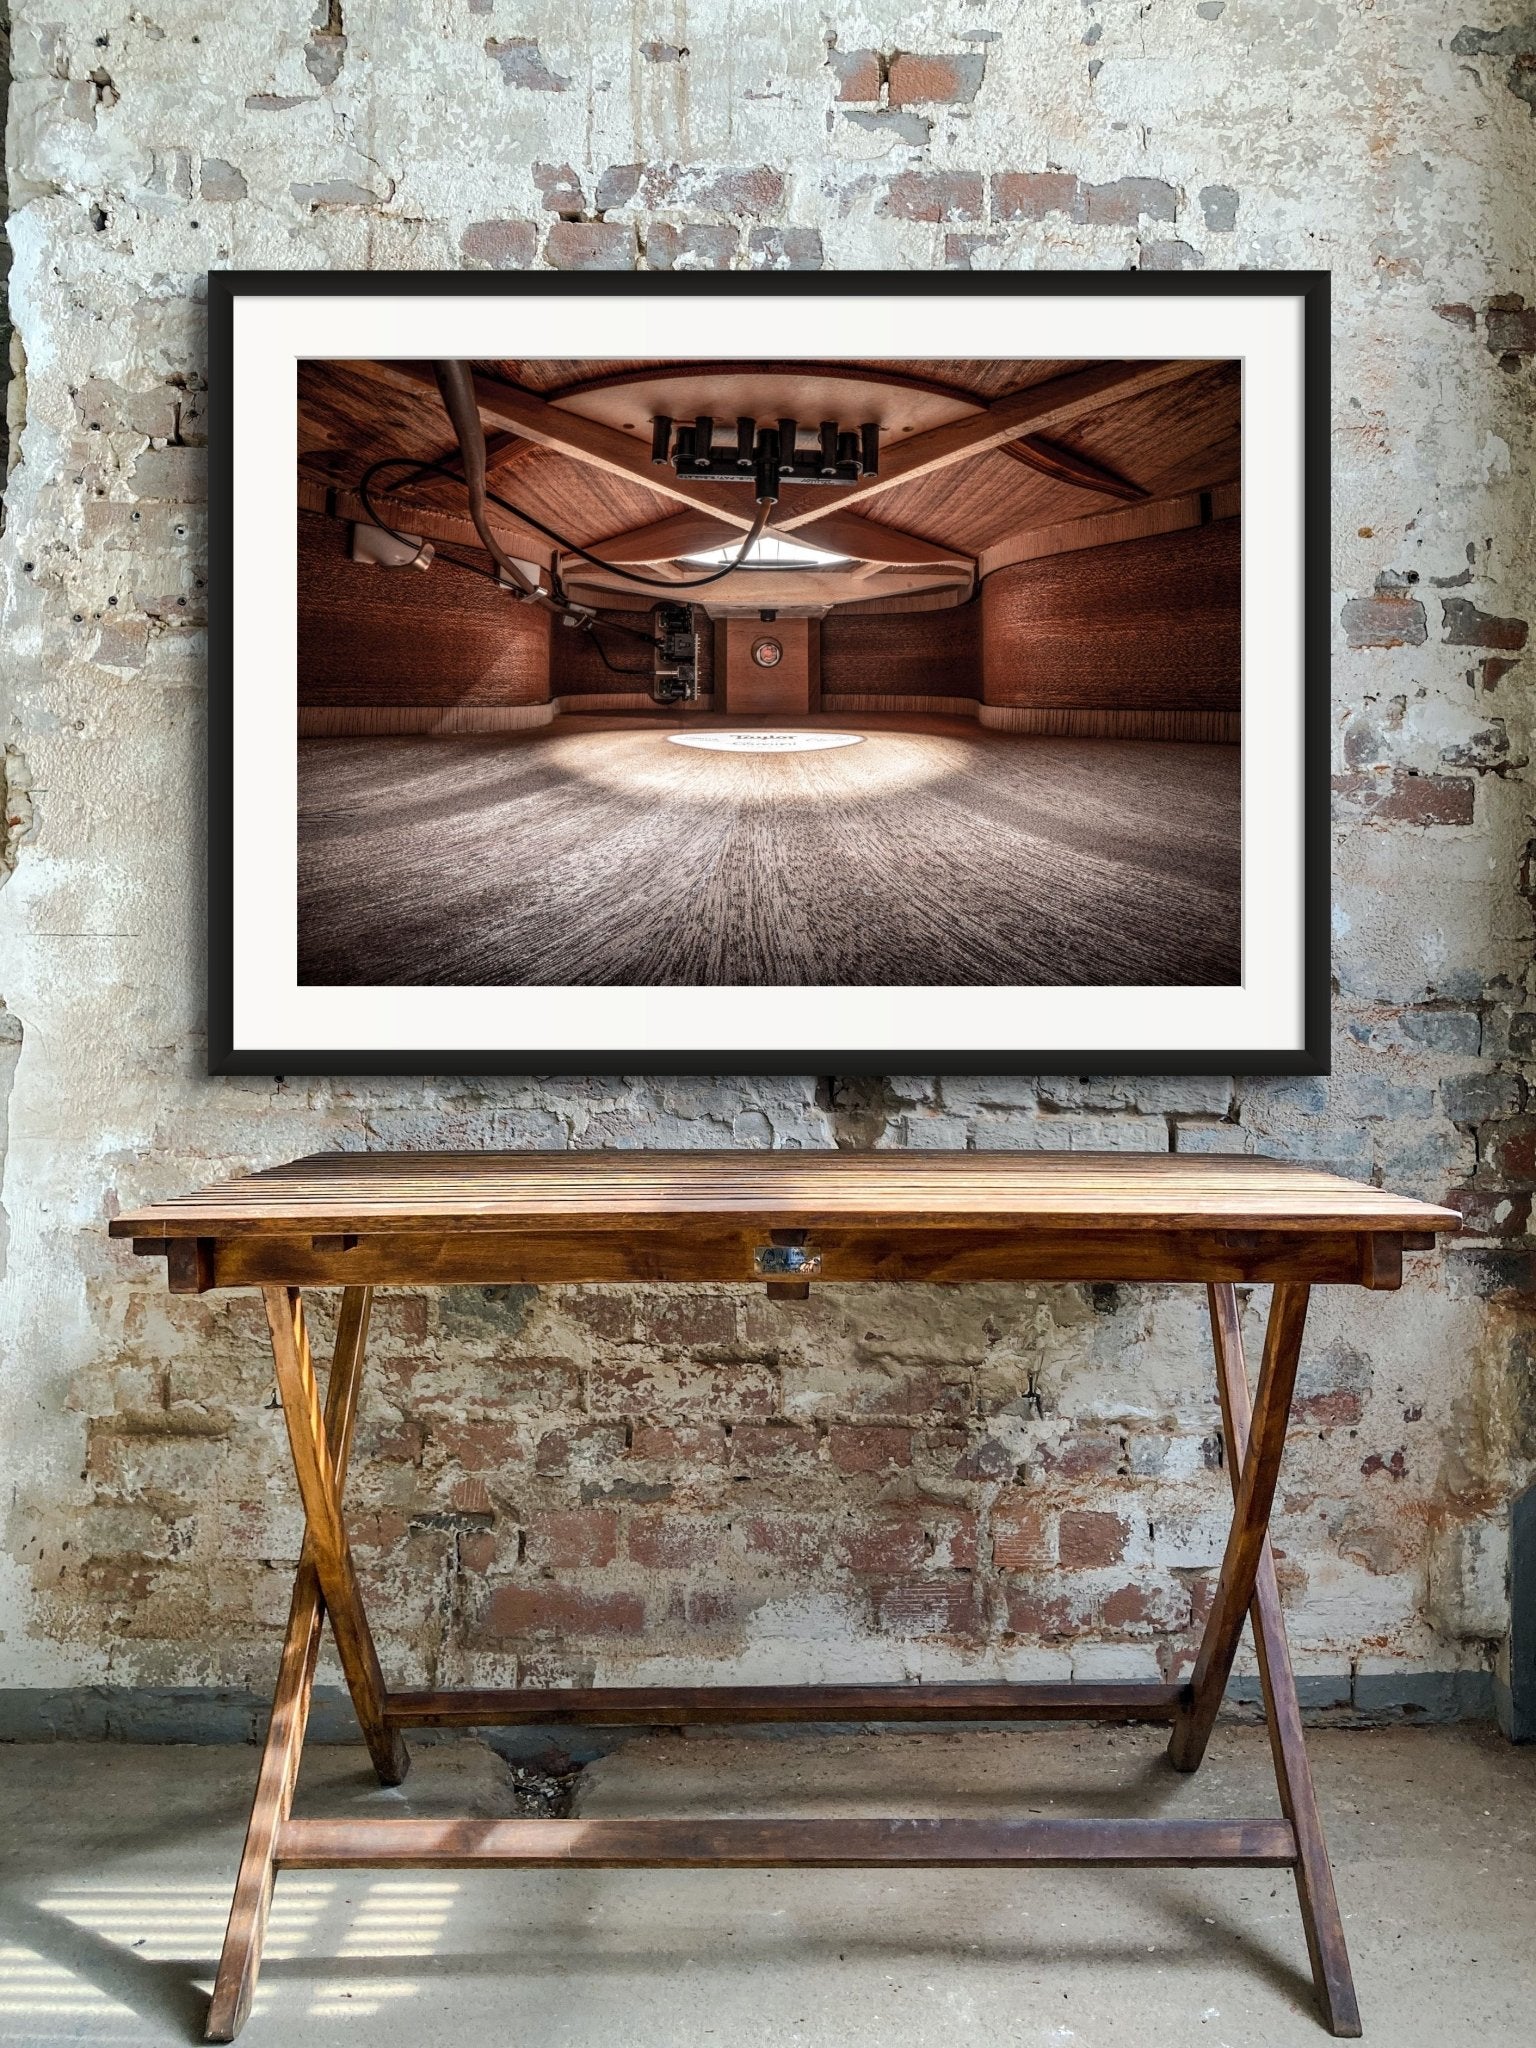 Photo of Taylor GS Mini Guitar. Framed & Signed Limited Edition Museum Quality Print. - Giclée - Architecture In Music